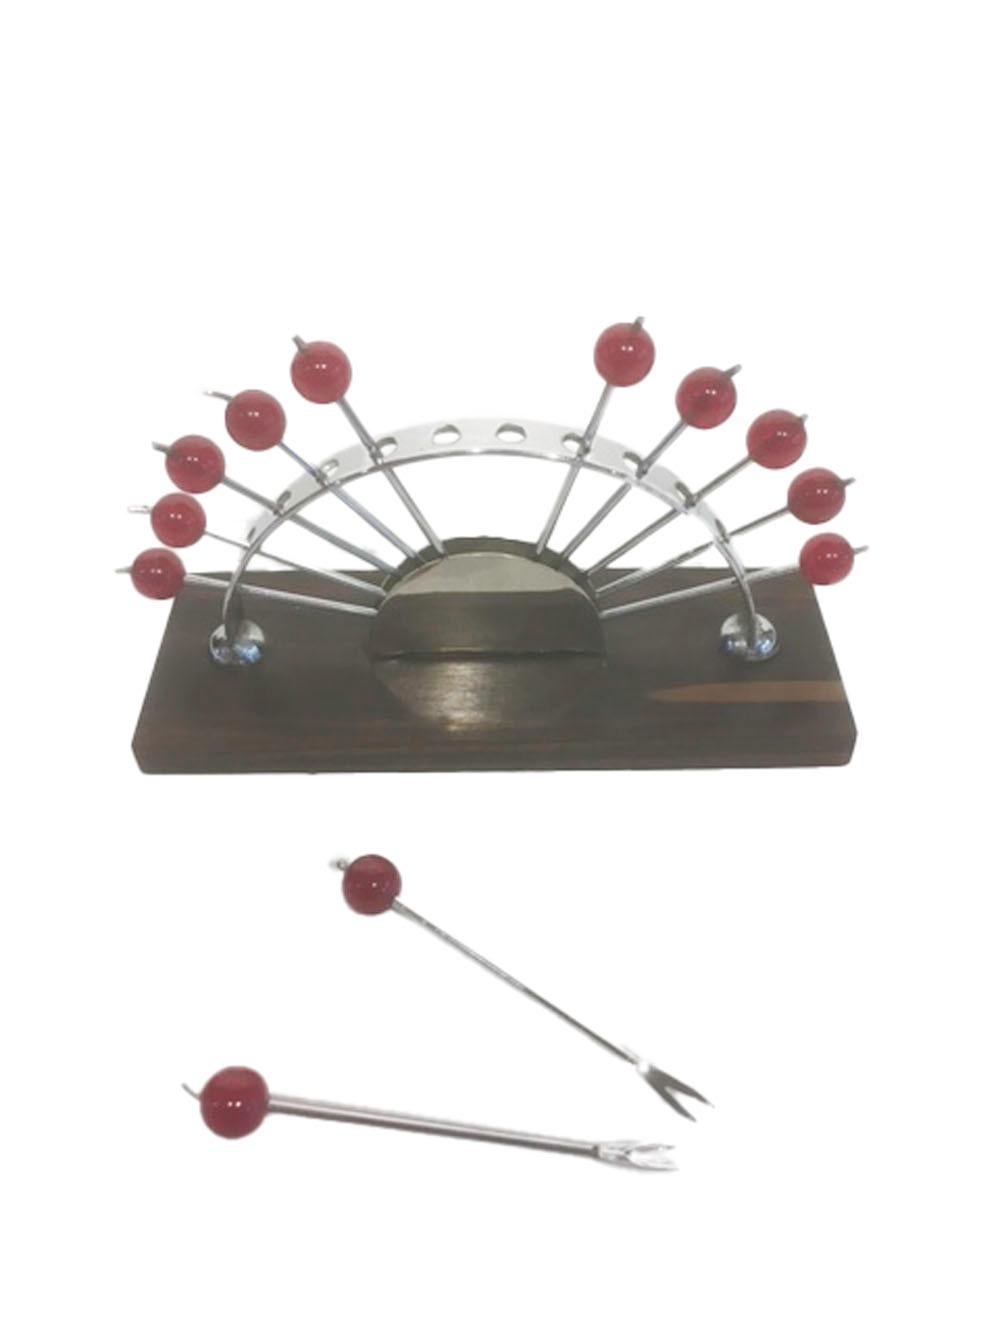 Plated 12 Art Deco Cocktail Picks with Cherry Red Tops in a Chrome Fan-Form Stand For Sale